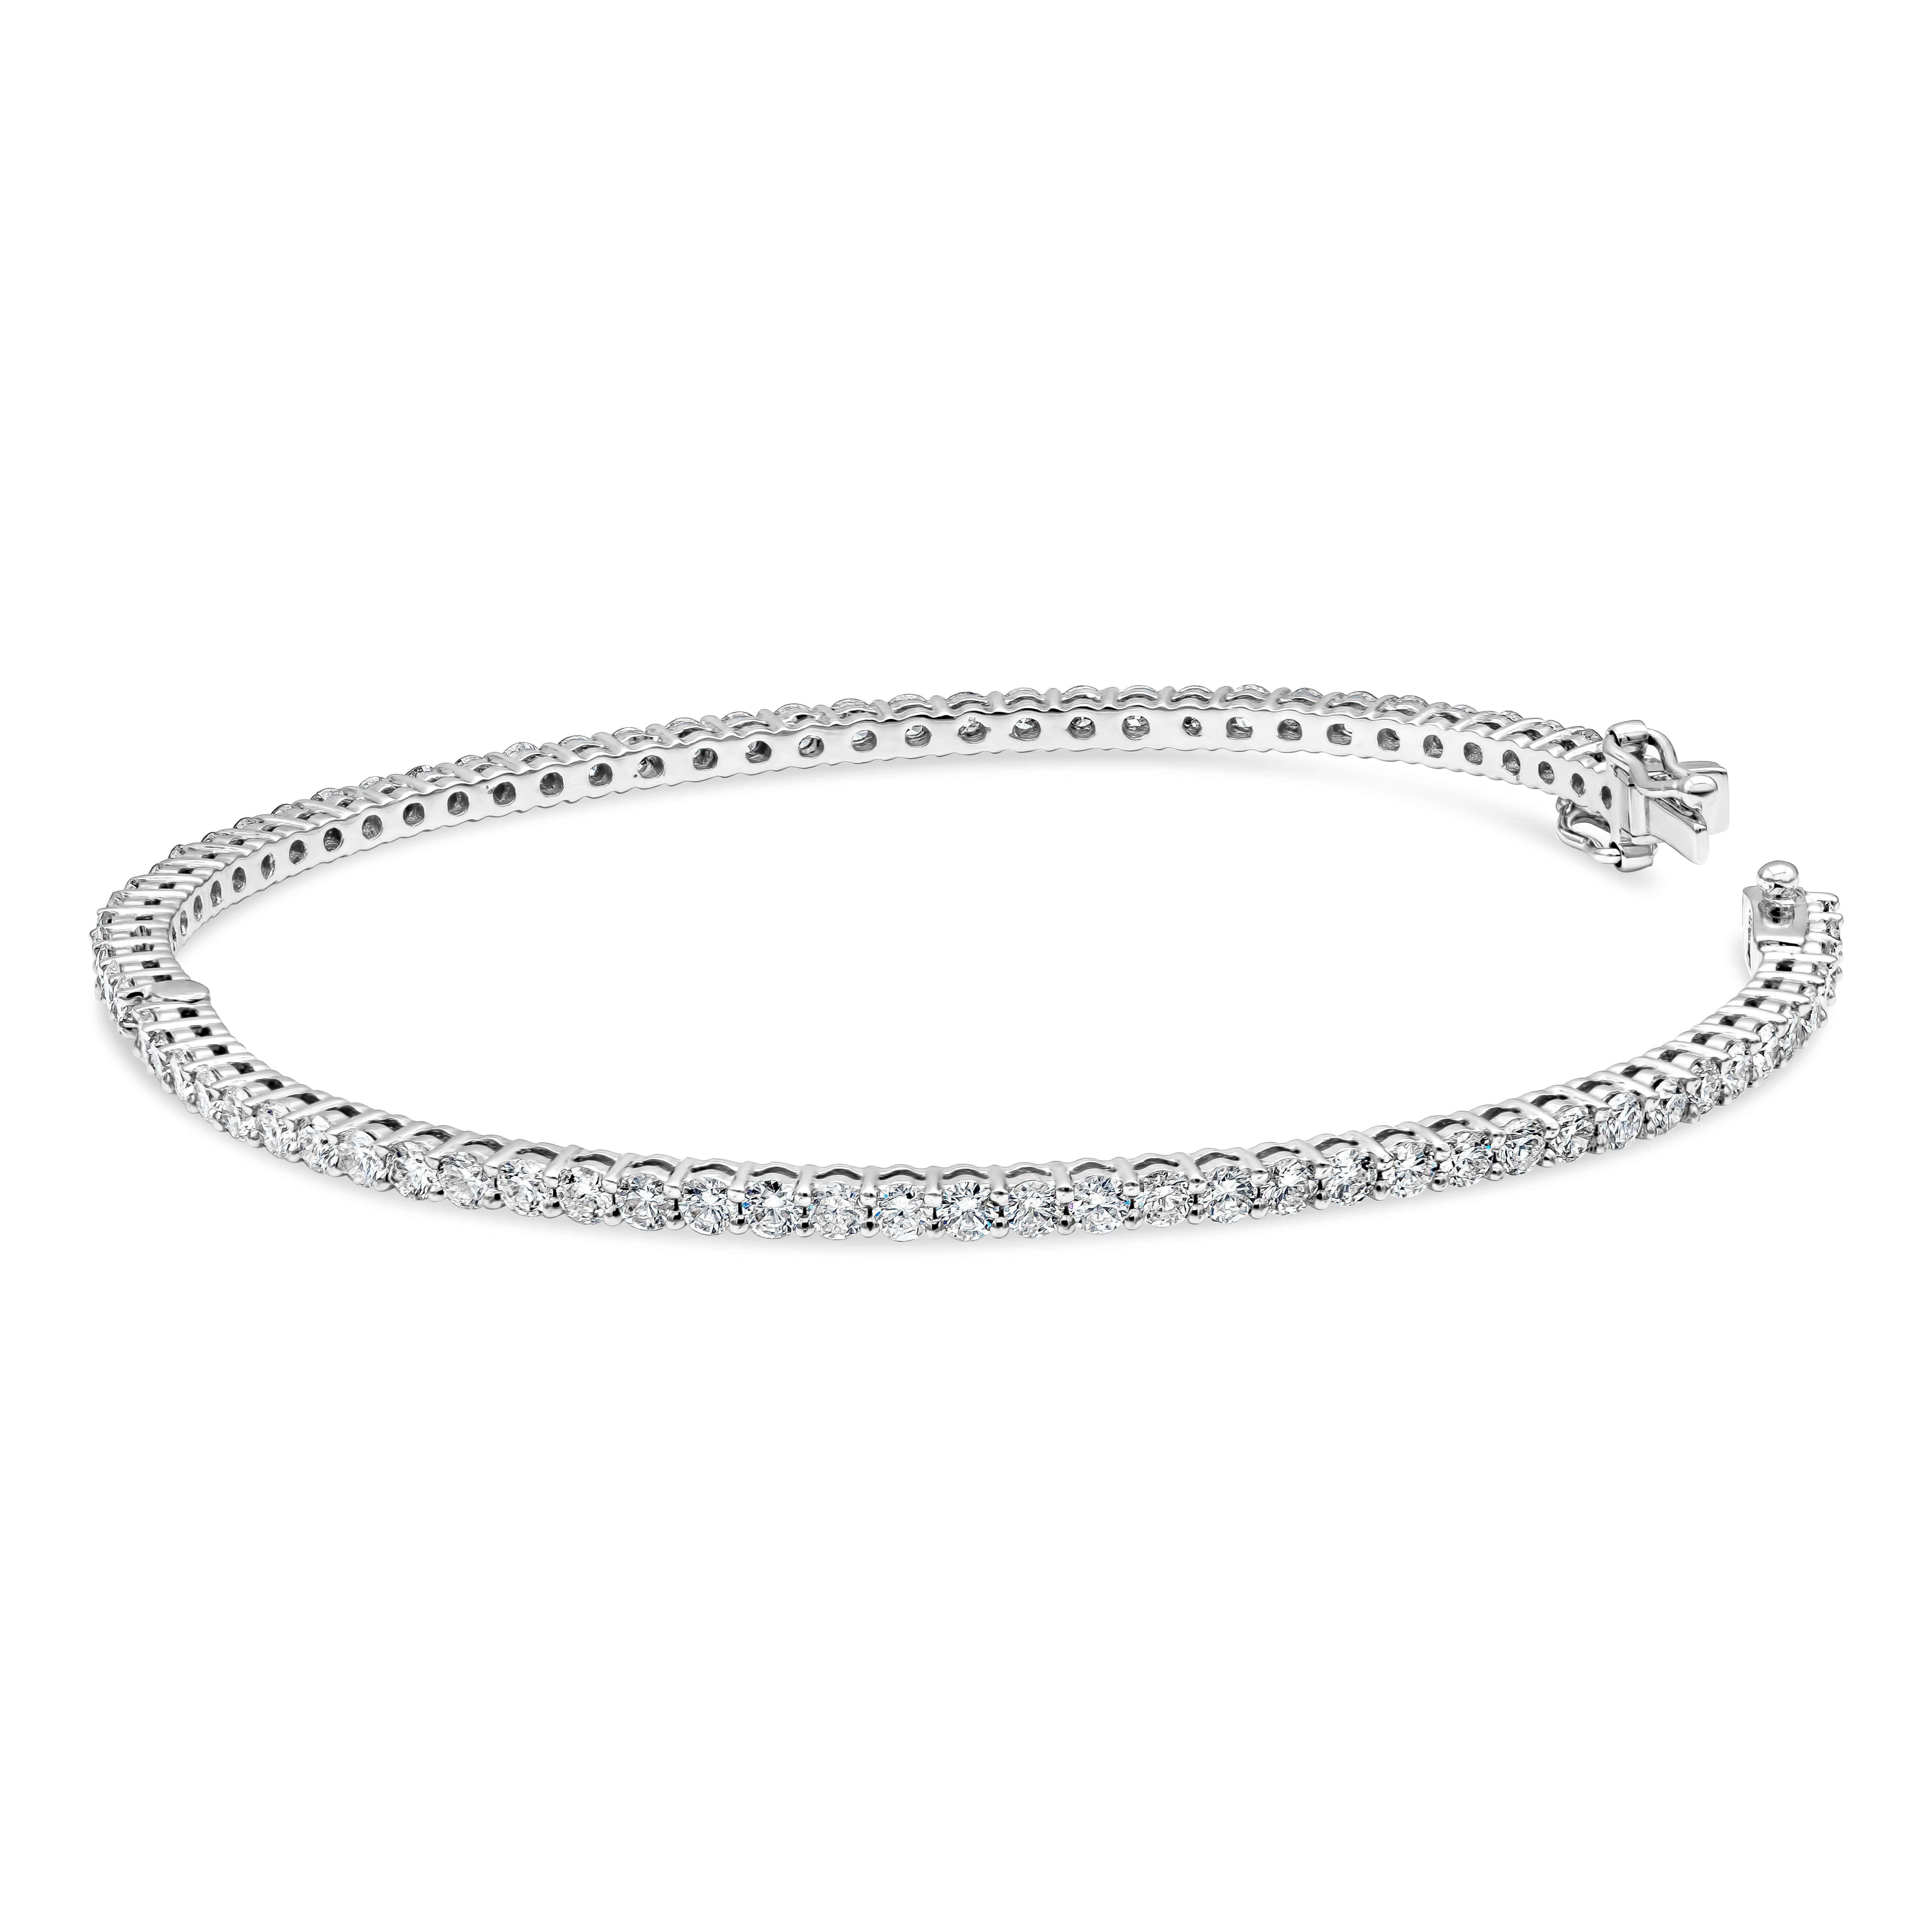 A classic bangle bracelet eternity encrusted with round brilliant diamonds weighing 3.15 carats total. Made with 18K White Gold

Style available in different price ranges. Prices are based on your selection. Please contact us for more information.